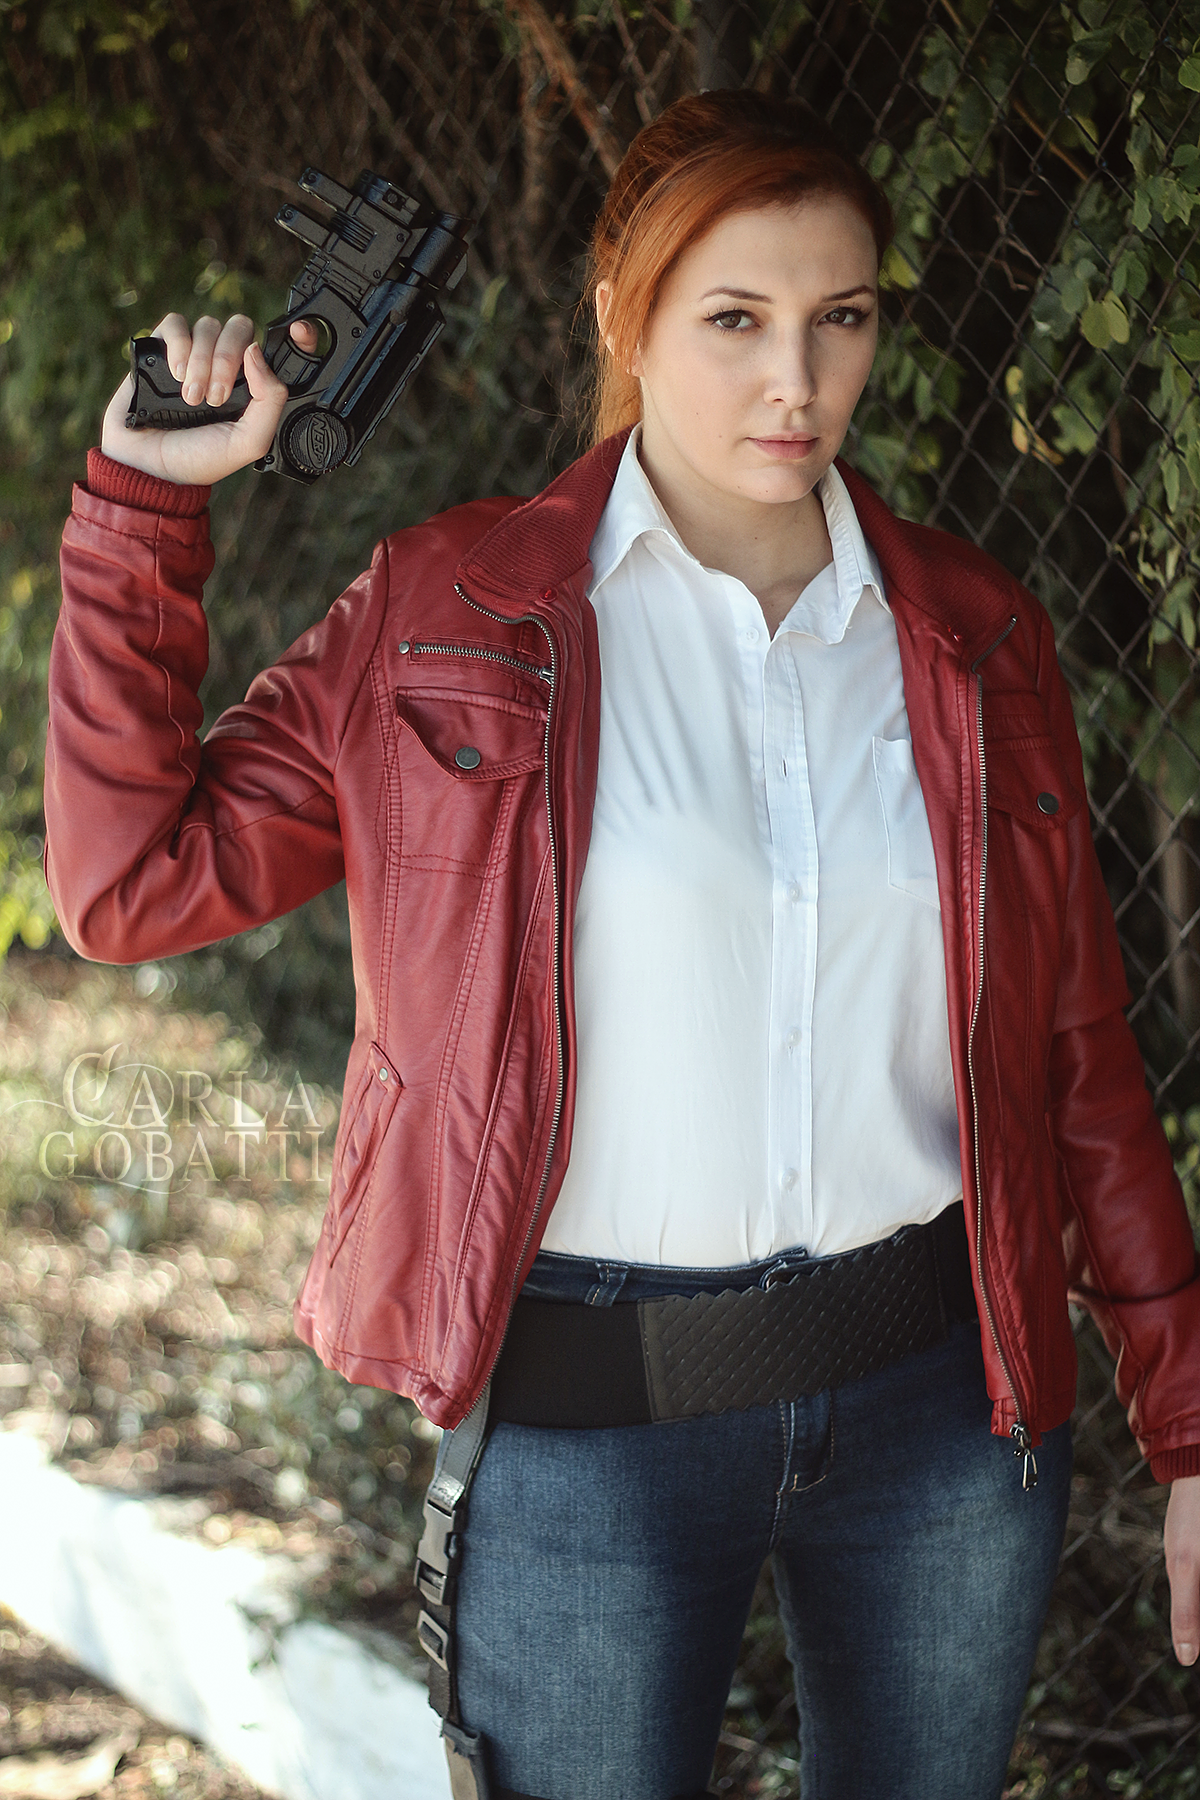 Claire Redfield - Resident Evil by Fin-Cosplay on DeviantArt